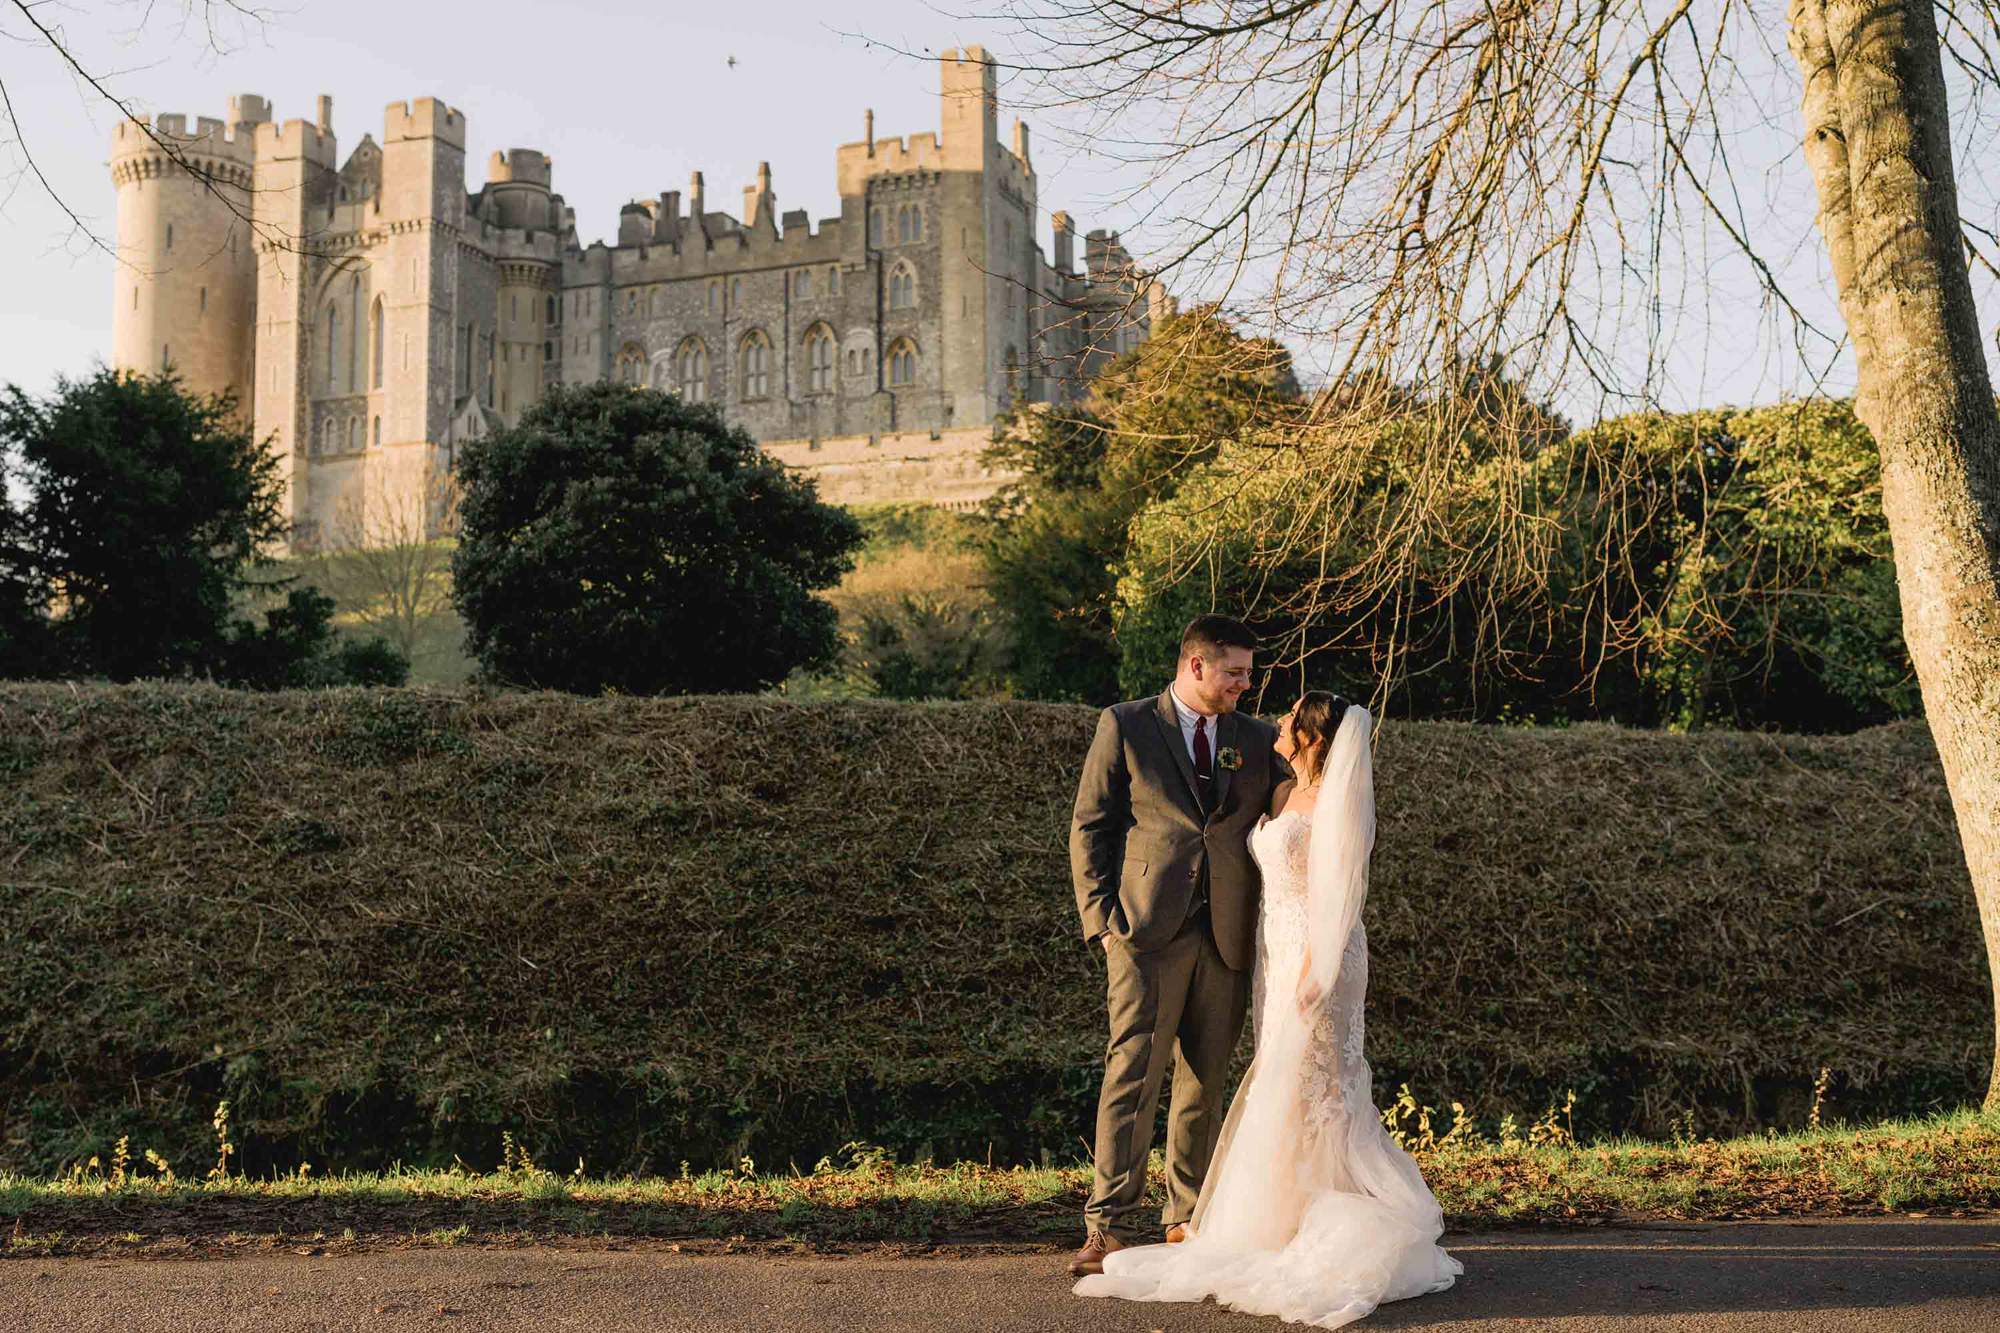 Bride and groom cuddle in front of Arundel Castle on their wedding day.